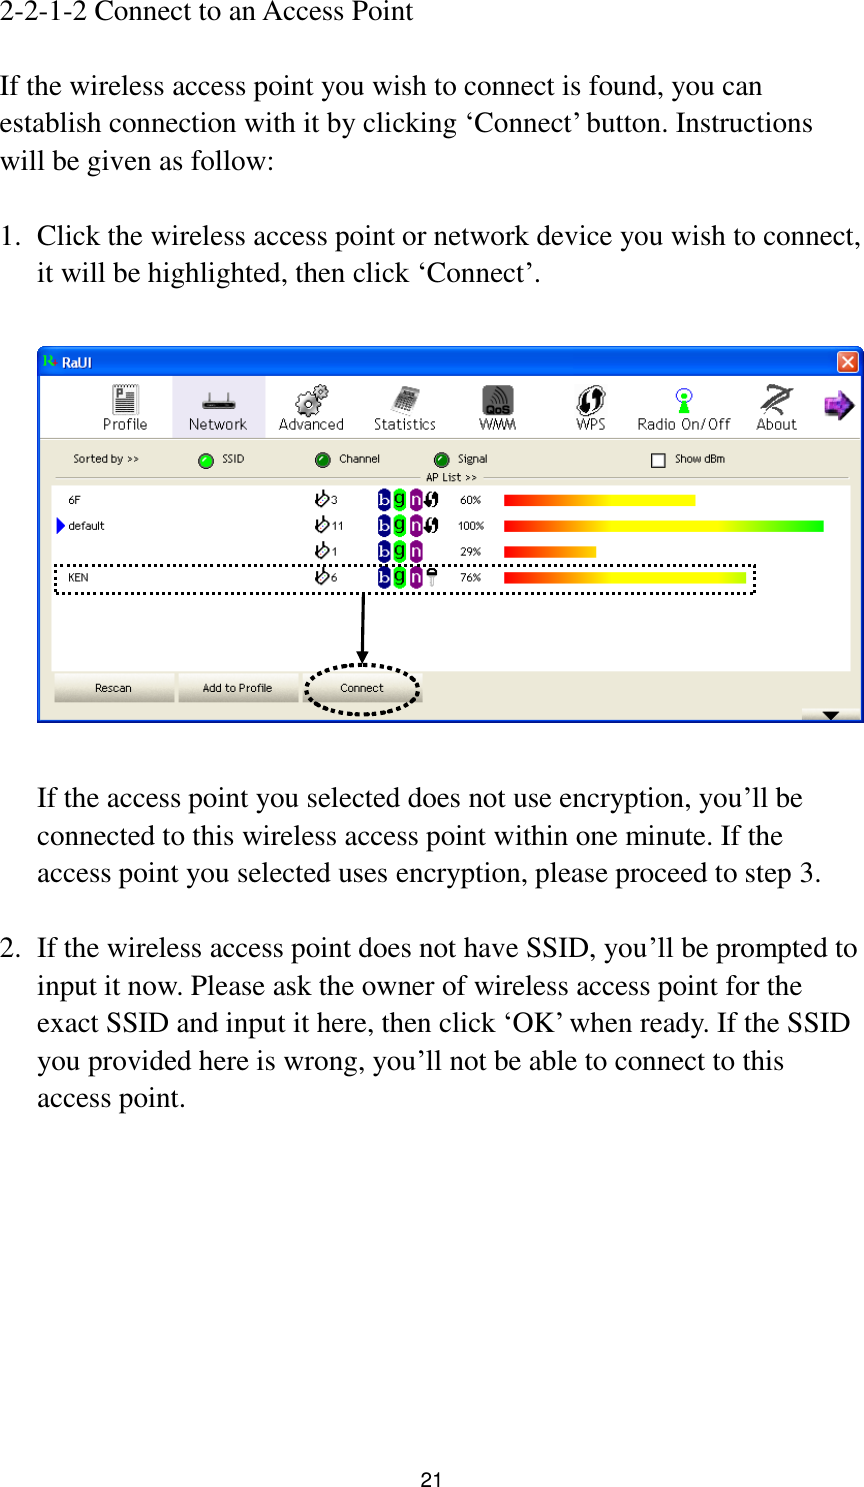  21 2-2-1-2 Connect to an Access Point  If the wireless access point you wish to connect is found, you can establish connection with it by clicking „Connect‟ button. Instructions will be given as follow:  1. Click the wireless access point or network device you wish to connect, it will be highlighted, then click „Connect‟.    If the access point you selected does not use encryption, you‟ll be connected to this wireless access point within one minute. If the access point you selected uses encryption, please proceed to step 3.  2. If the wireless access point does not have SSID, you‟ll be prompted to input it now. Please ask the owner of wireless access point for the exact SSID and input it here, then click „OK‟ when ready. If the SSID you provided here is wrong, you‟ll not be able to connect to this access point. 